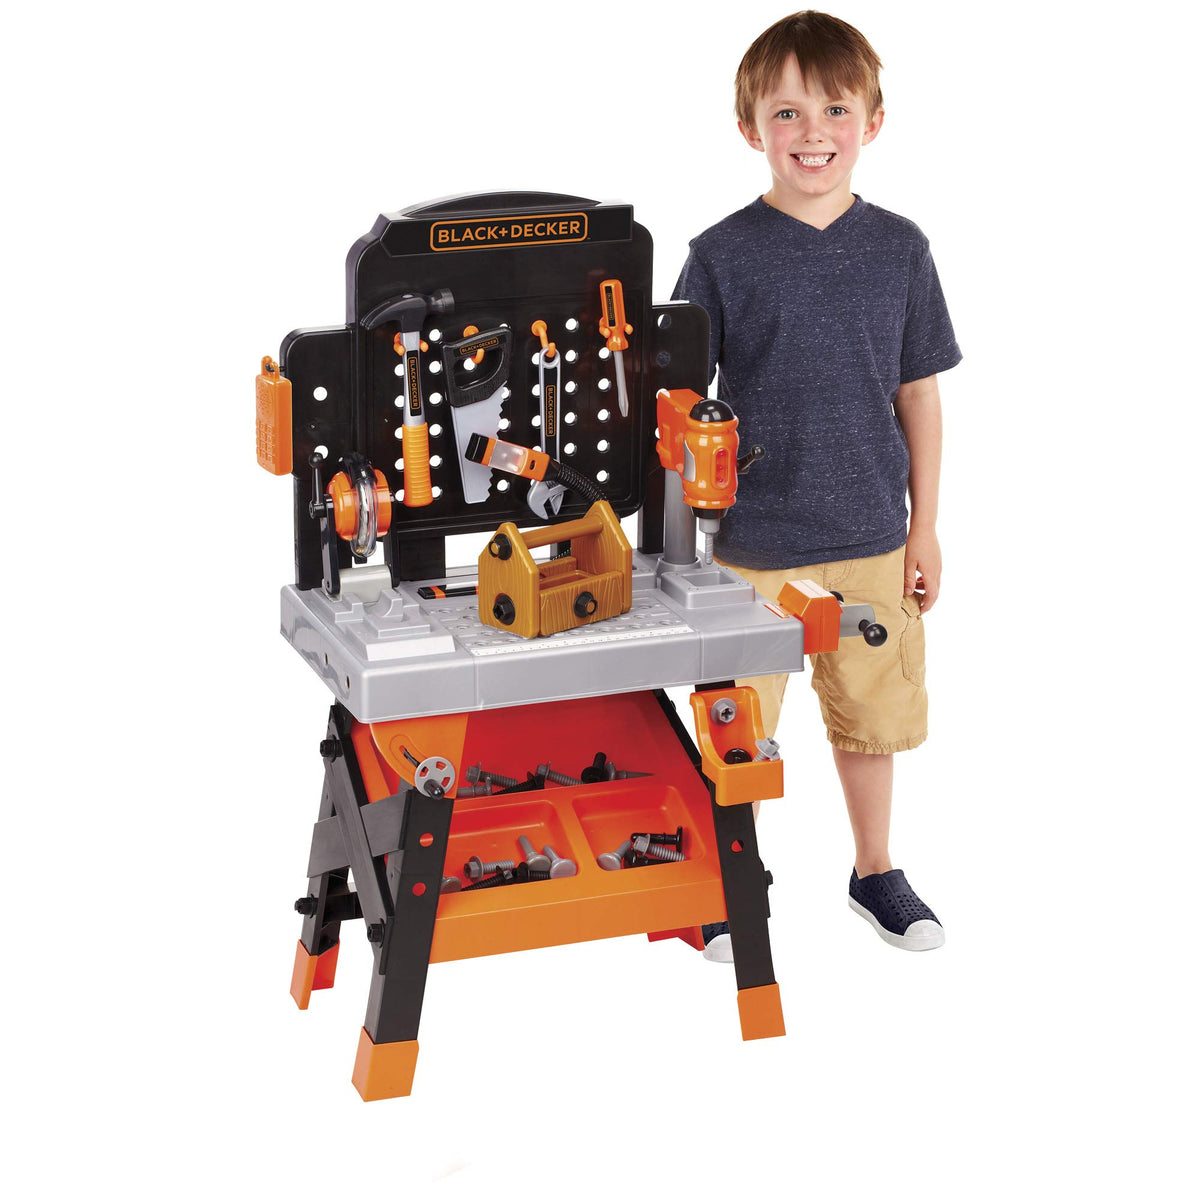 Black & Decker Kids Tool Table Toy - Sherwood Auctions